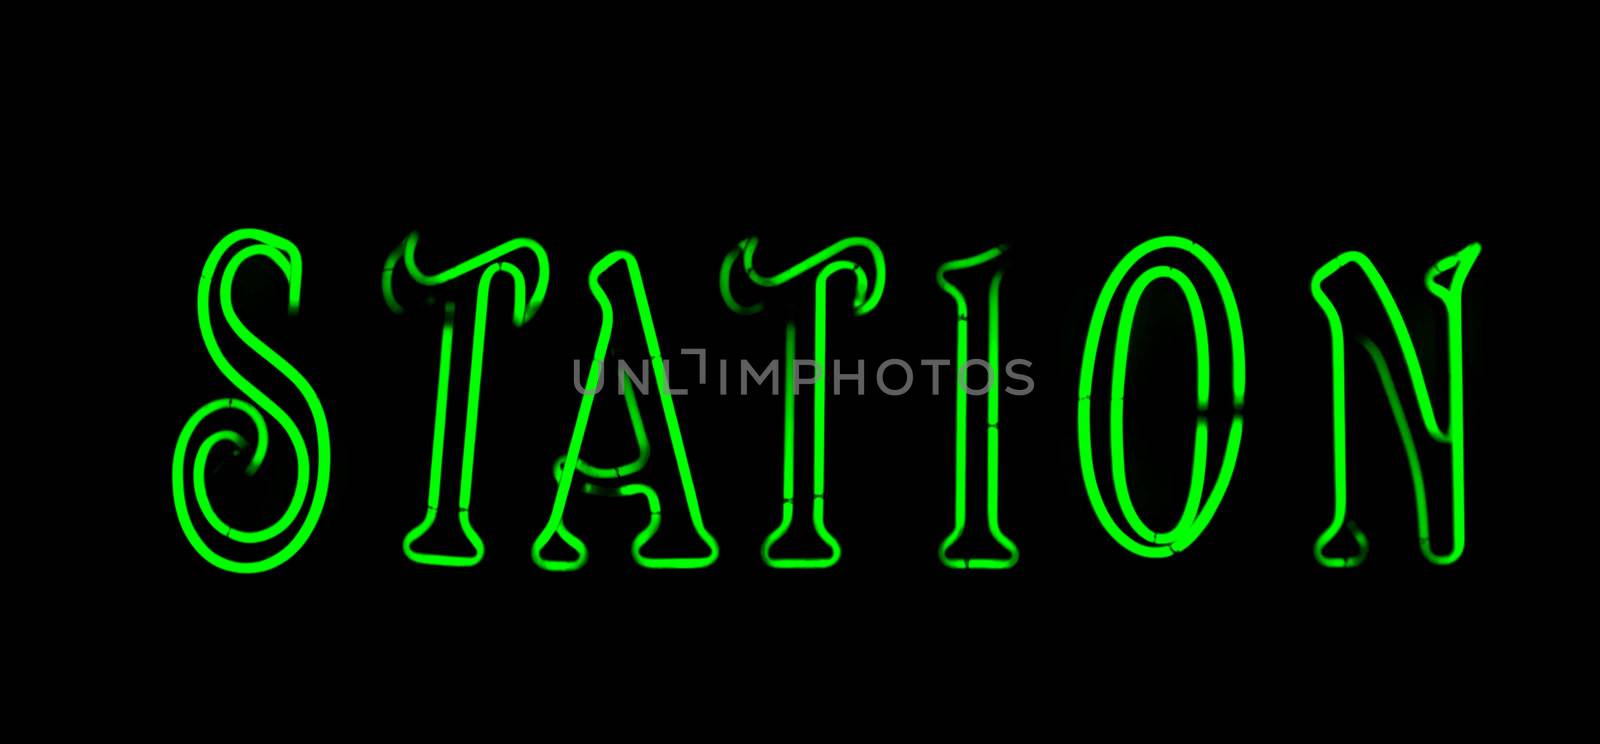 Green  station neon sign on black background